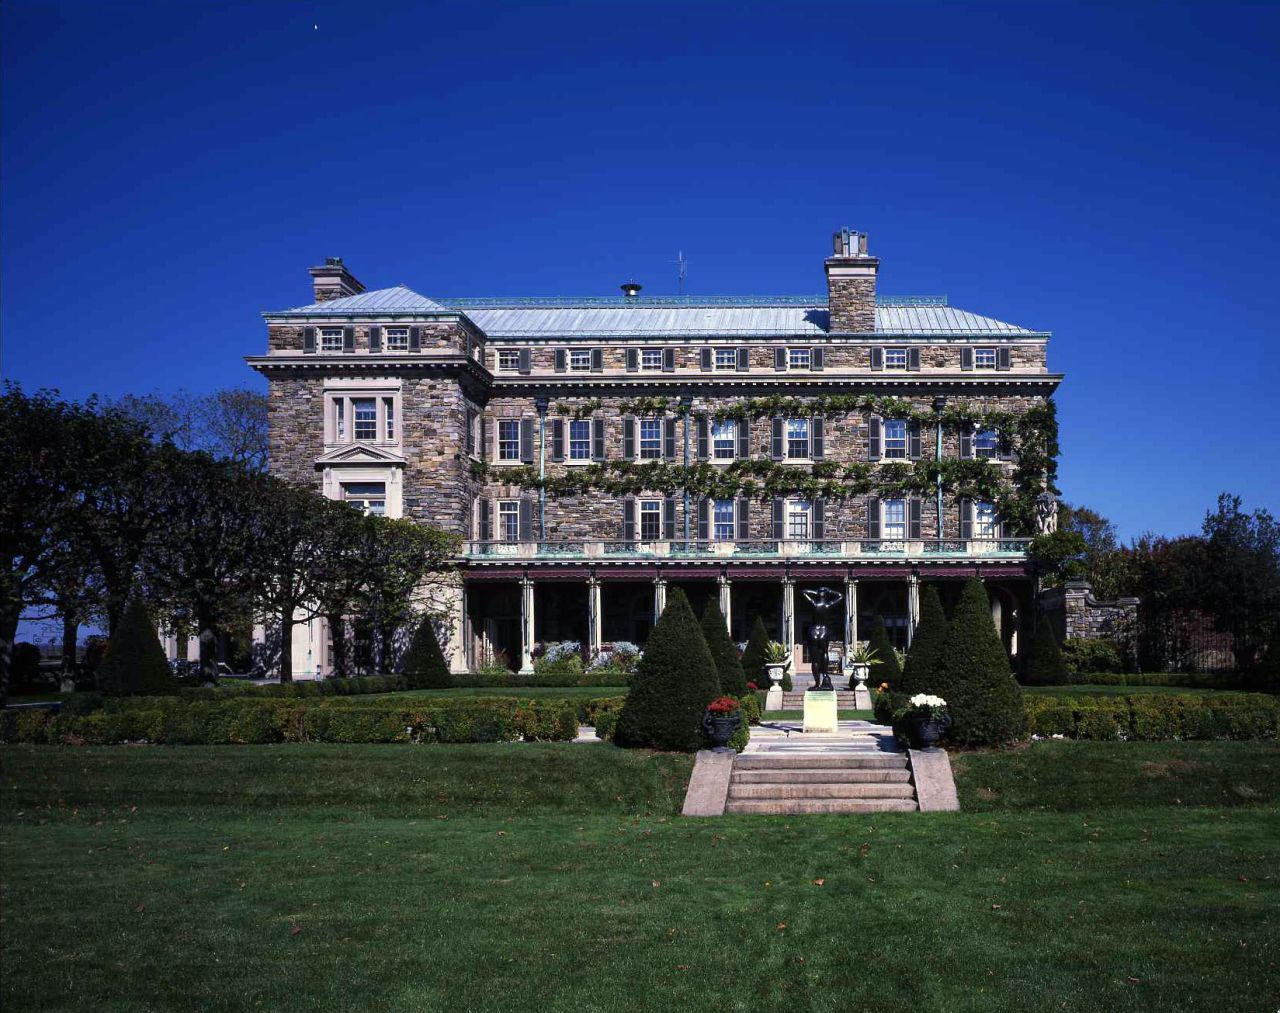 Four generations of the Rockefeller family lived at Kykuit (which means "lookout" in Dutch), starting with Standard Oil founder John D. Rockefeller. 